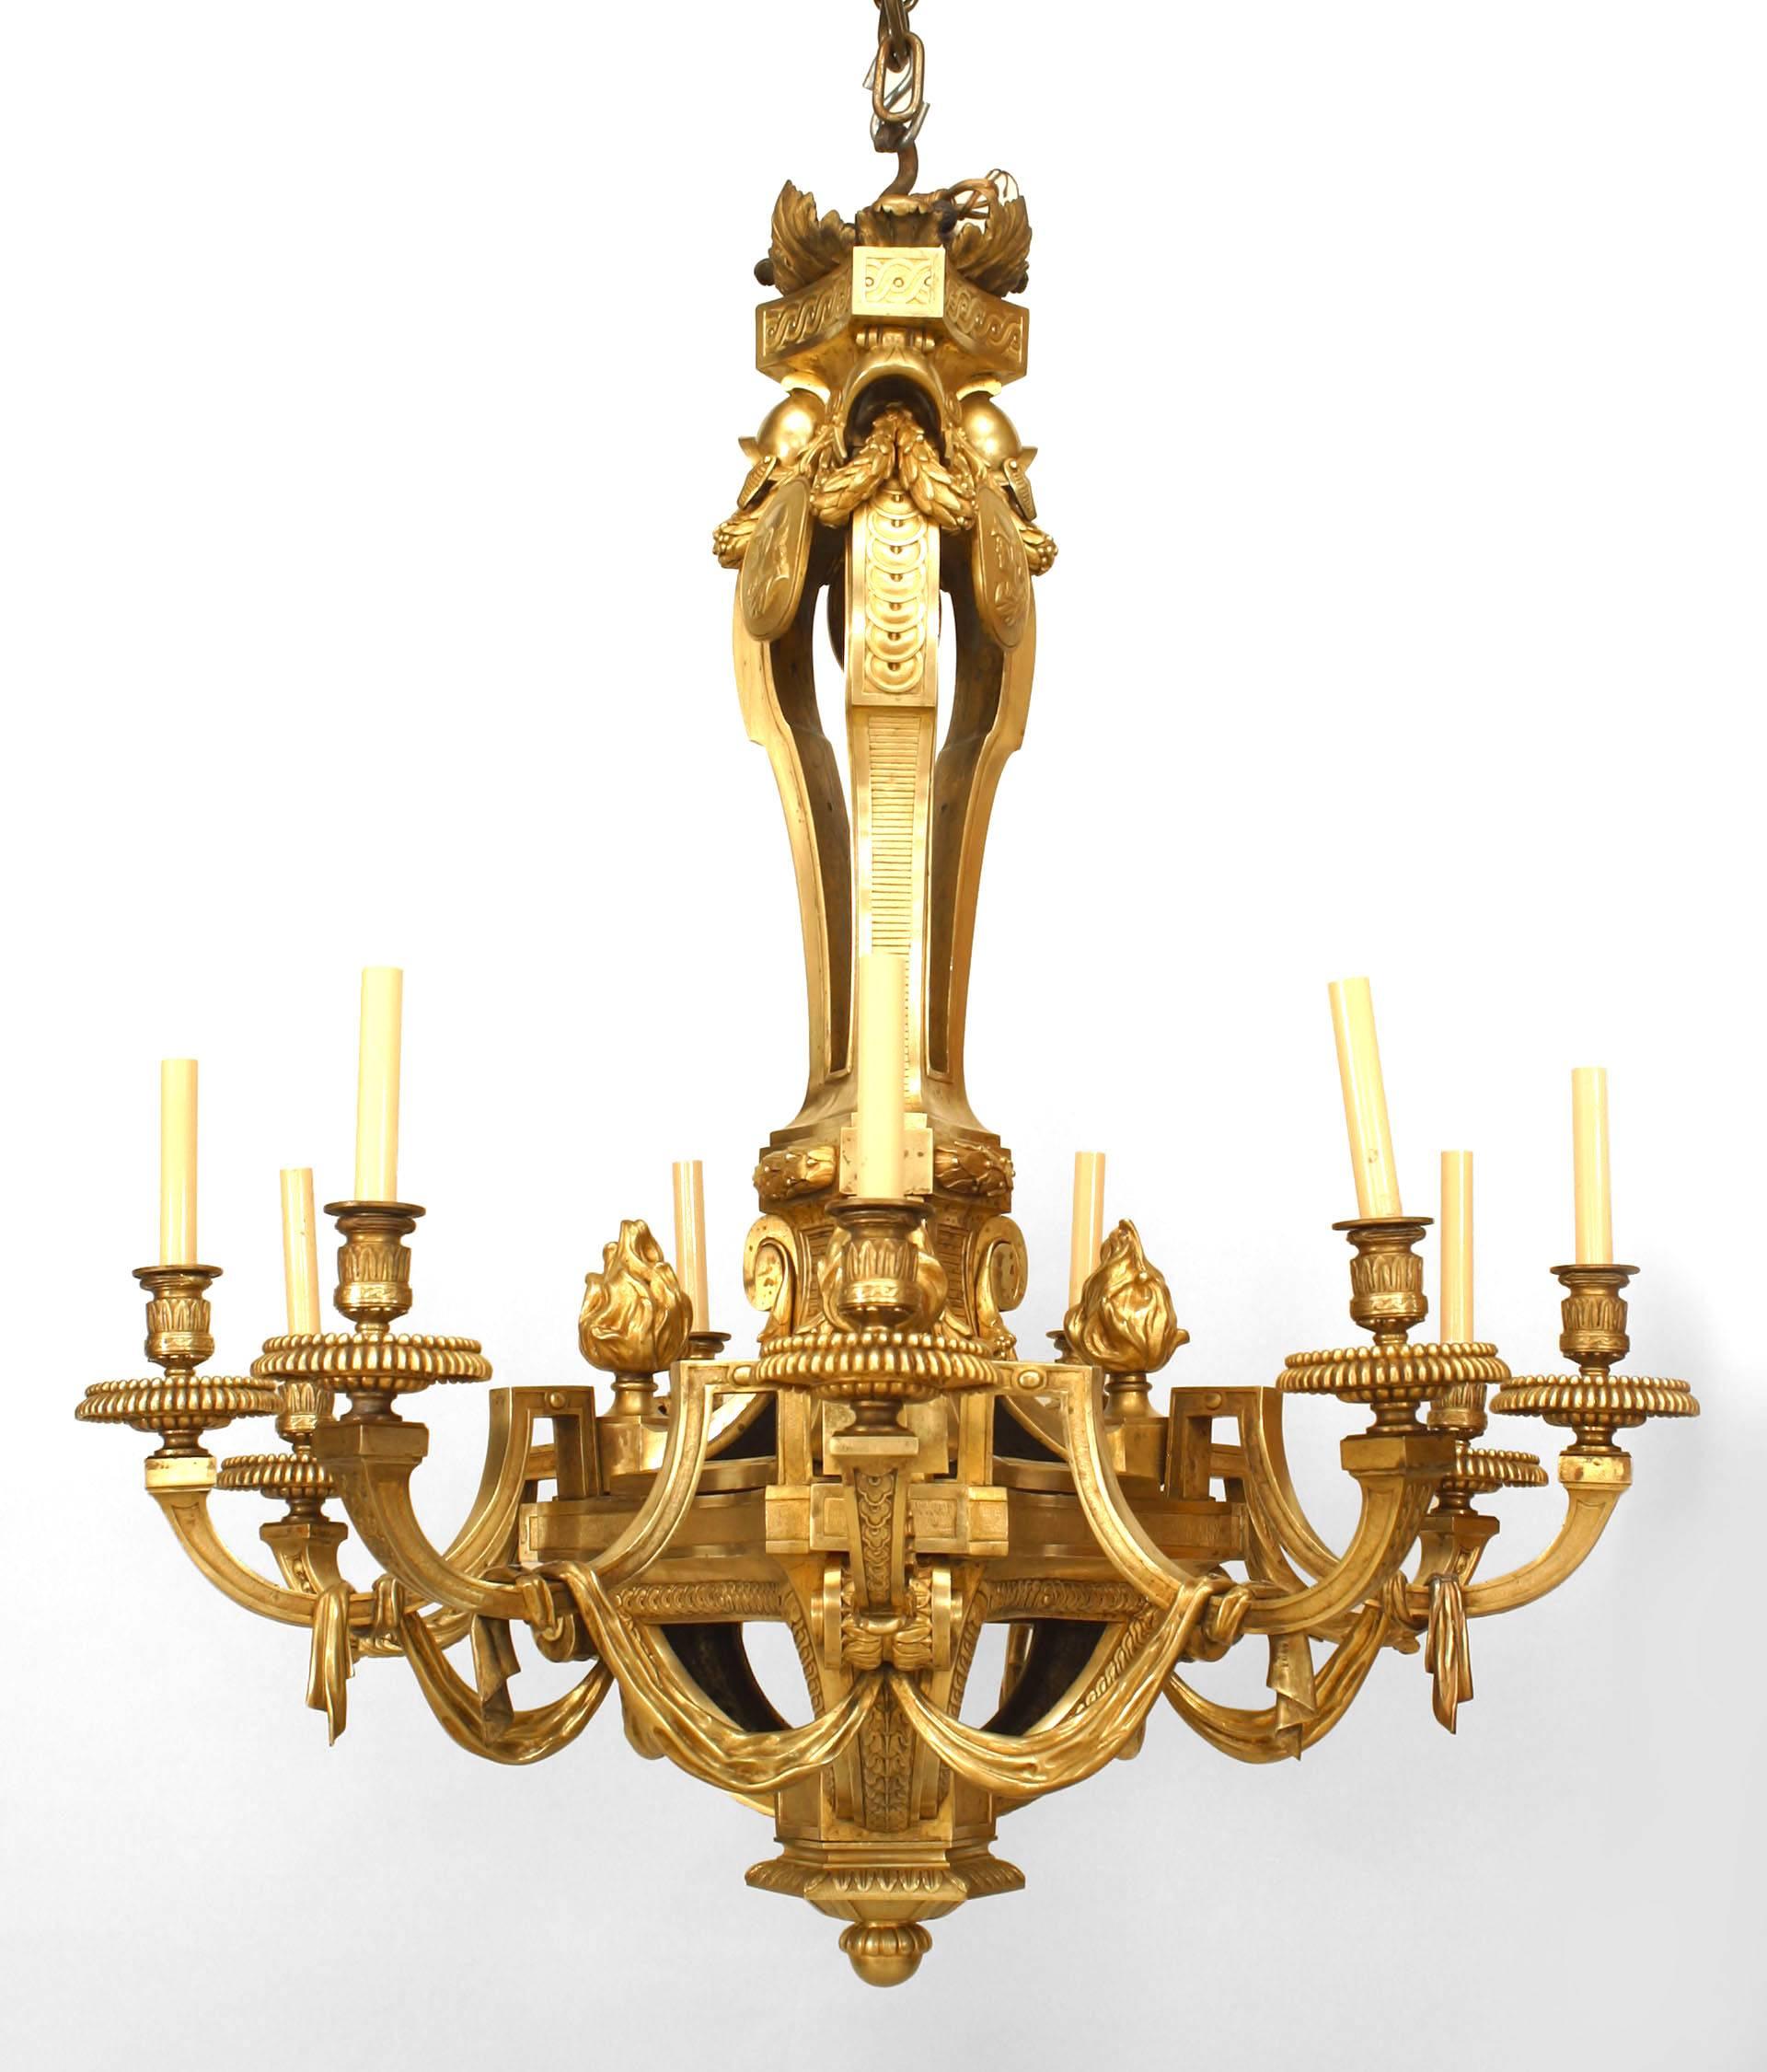 French Louis XVI-style (19th Century) bronze dore 12 arm chandelier with swag design and flame design.
